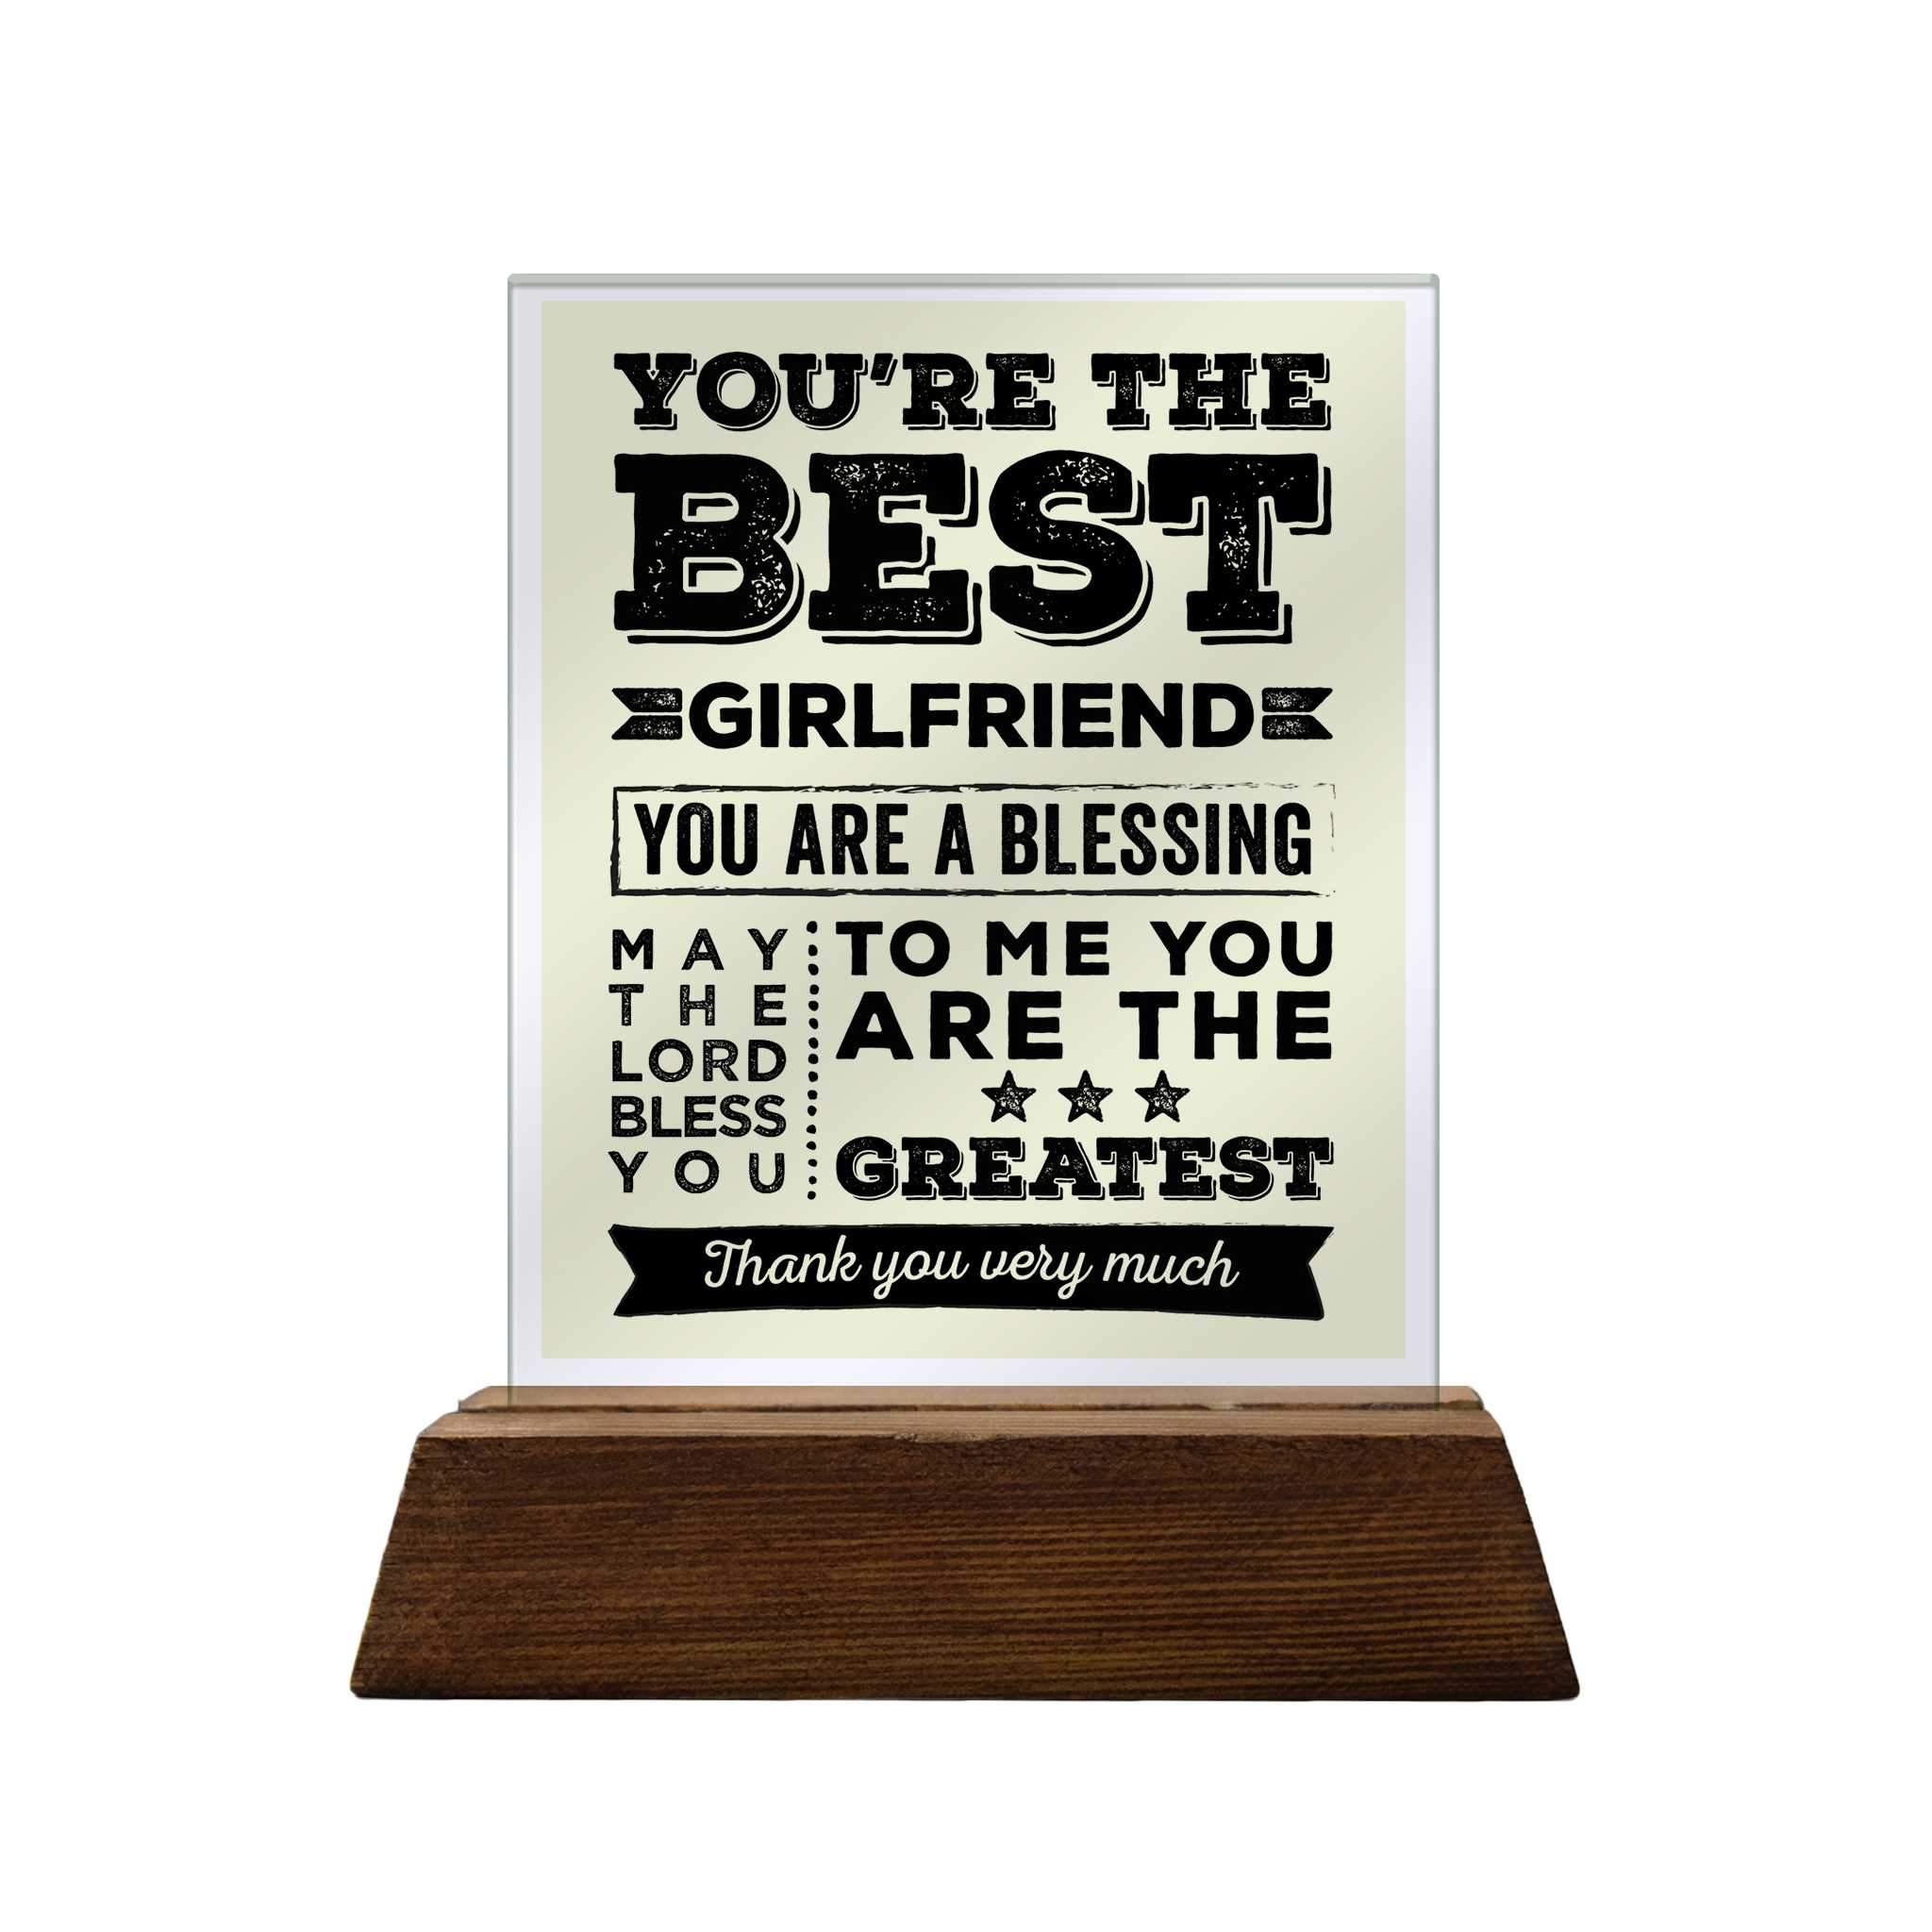 You're the Best Girlfriend Glass Plaque